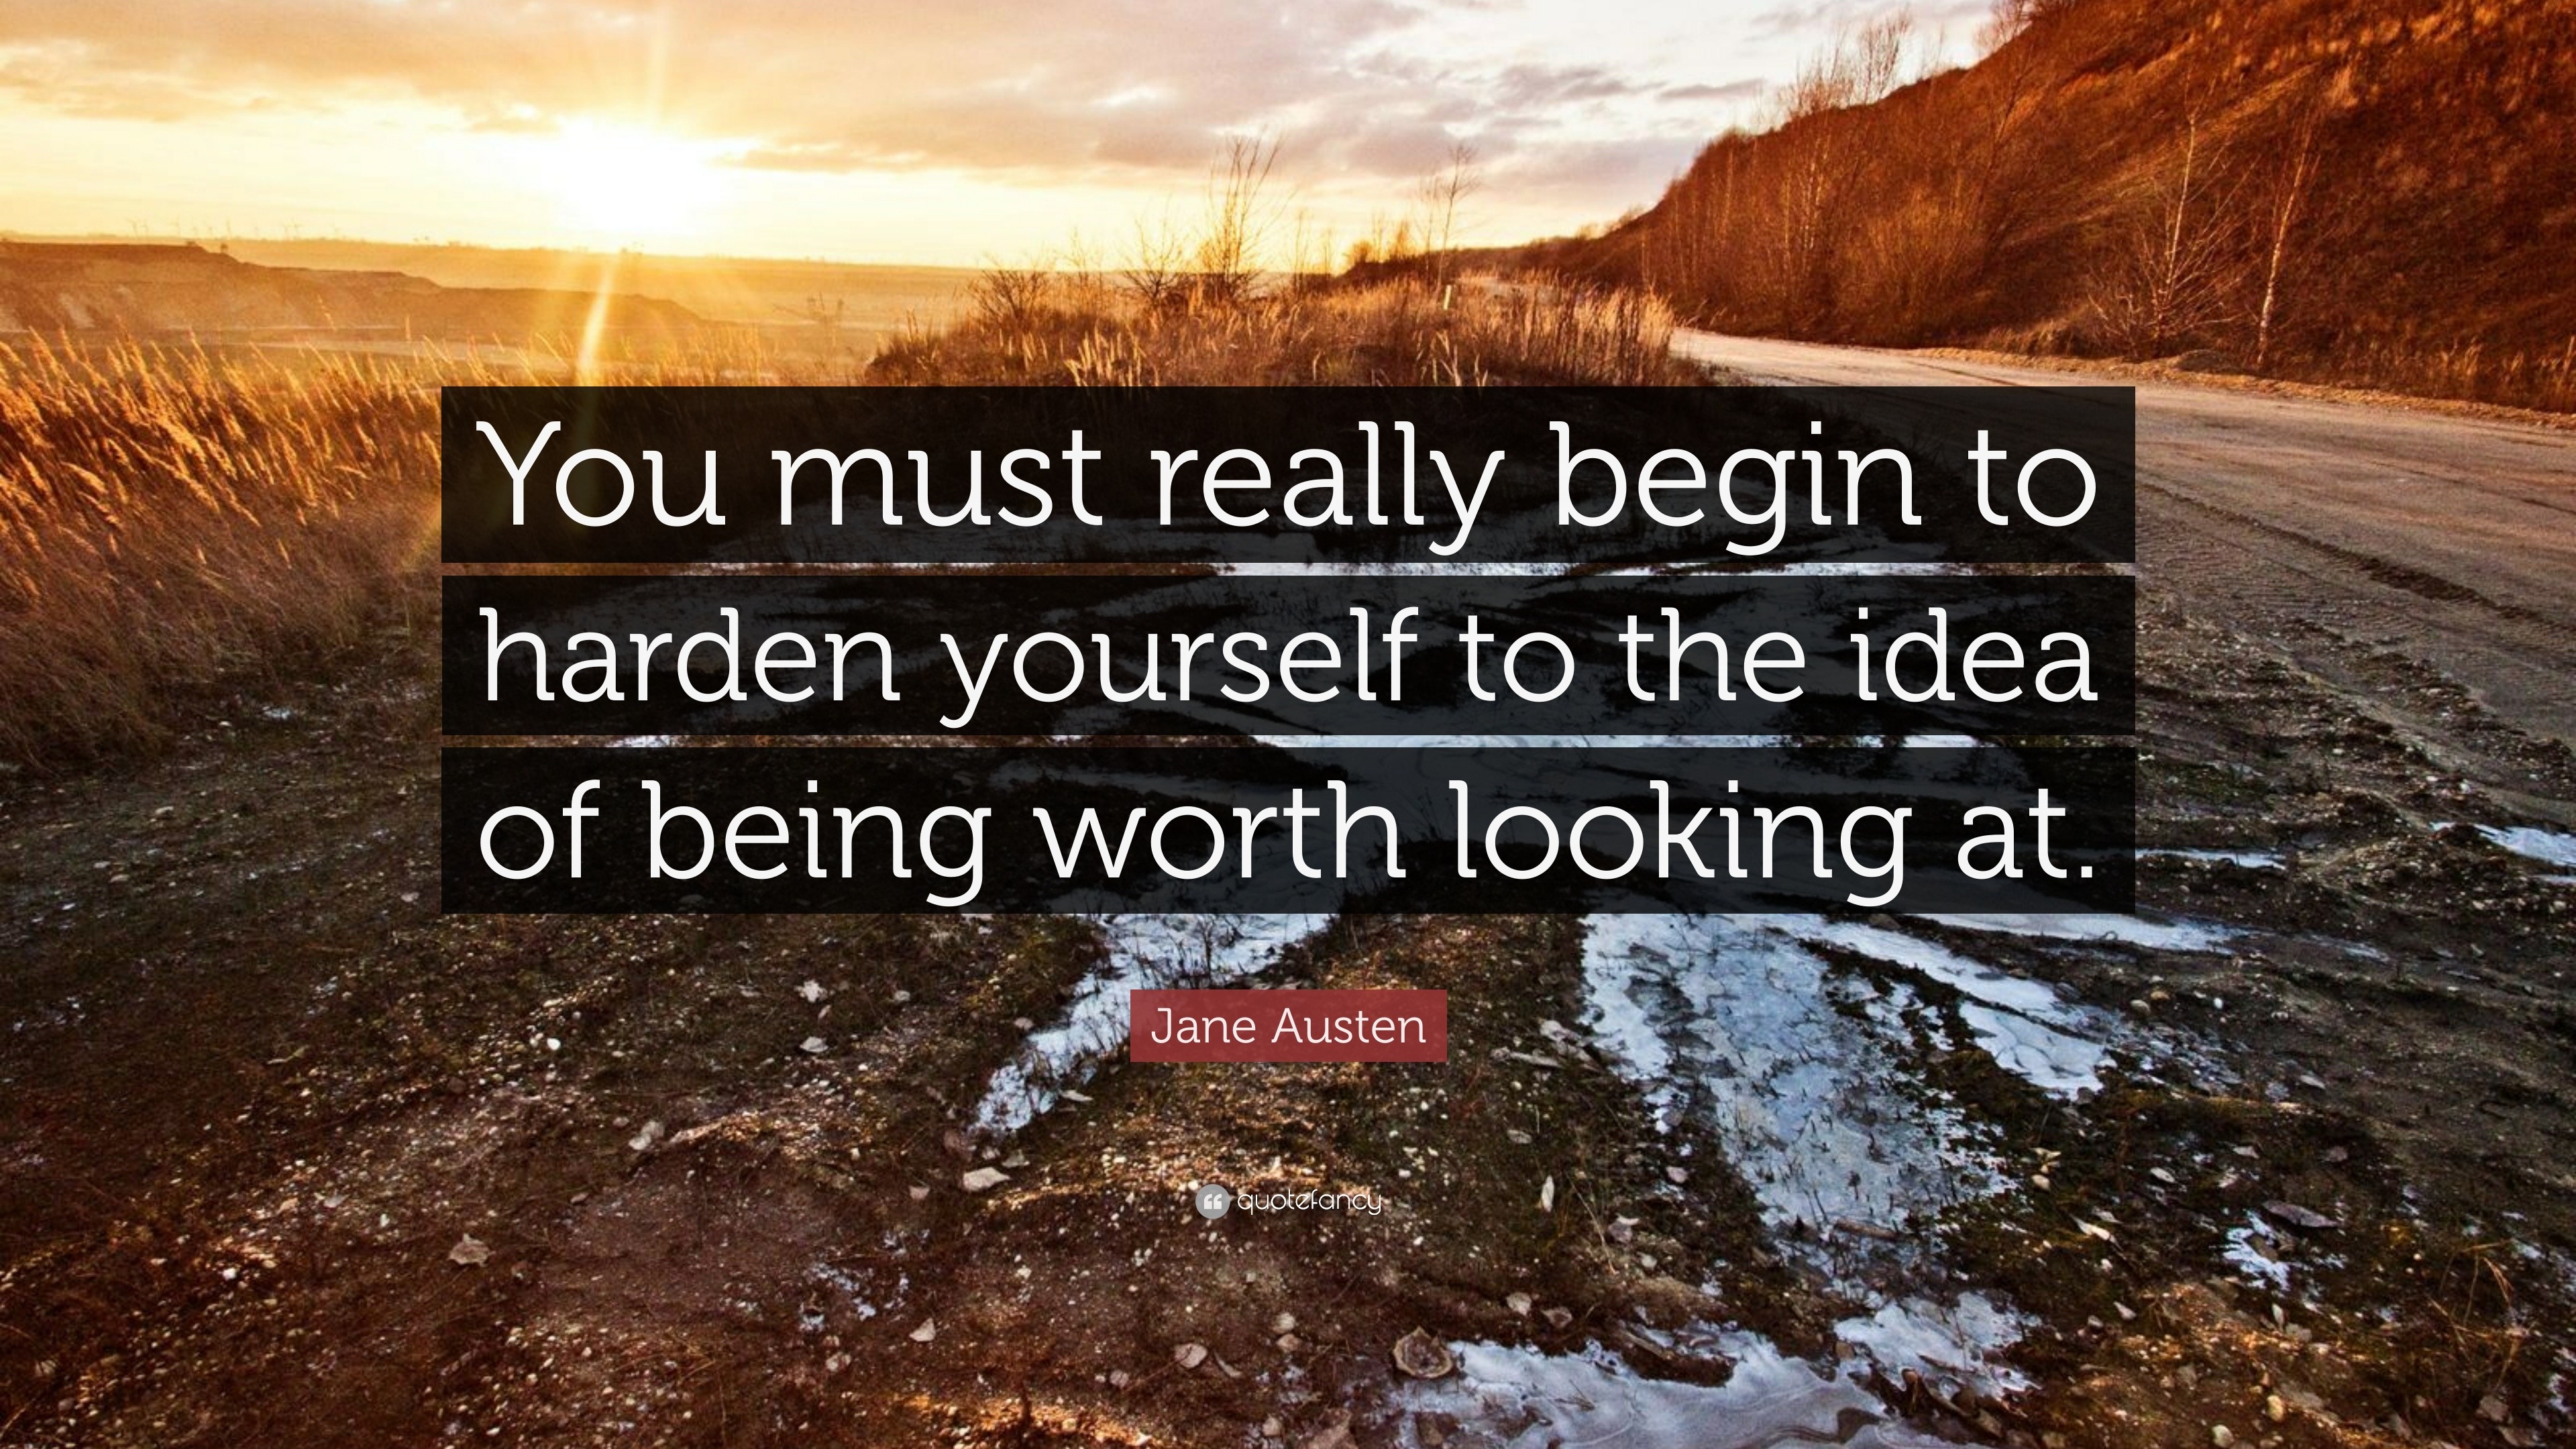 Jane Austen Quote: “You must really begin to harden yourself to the ...